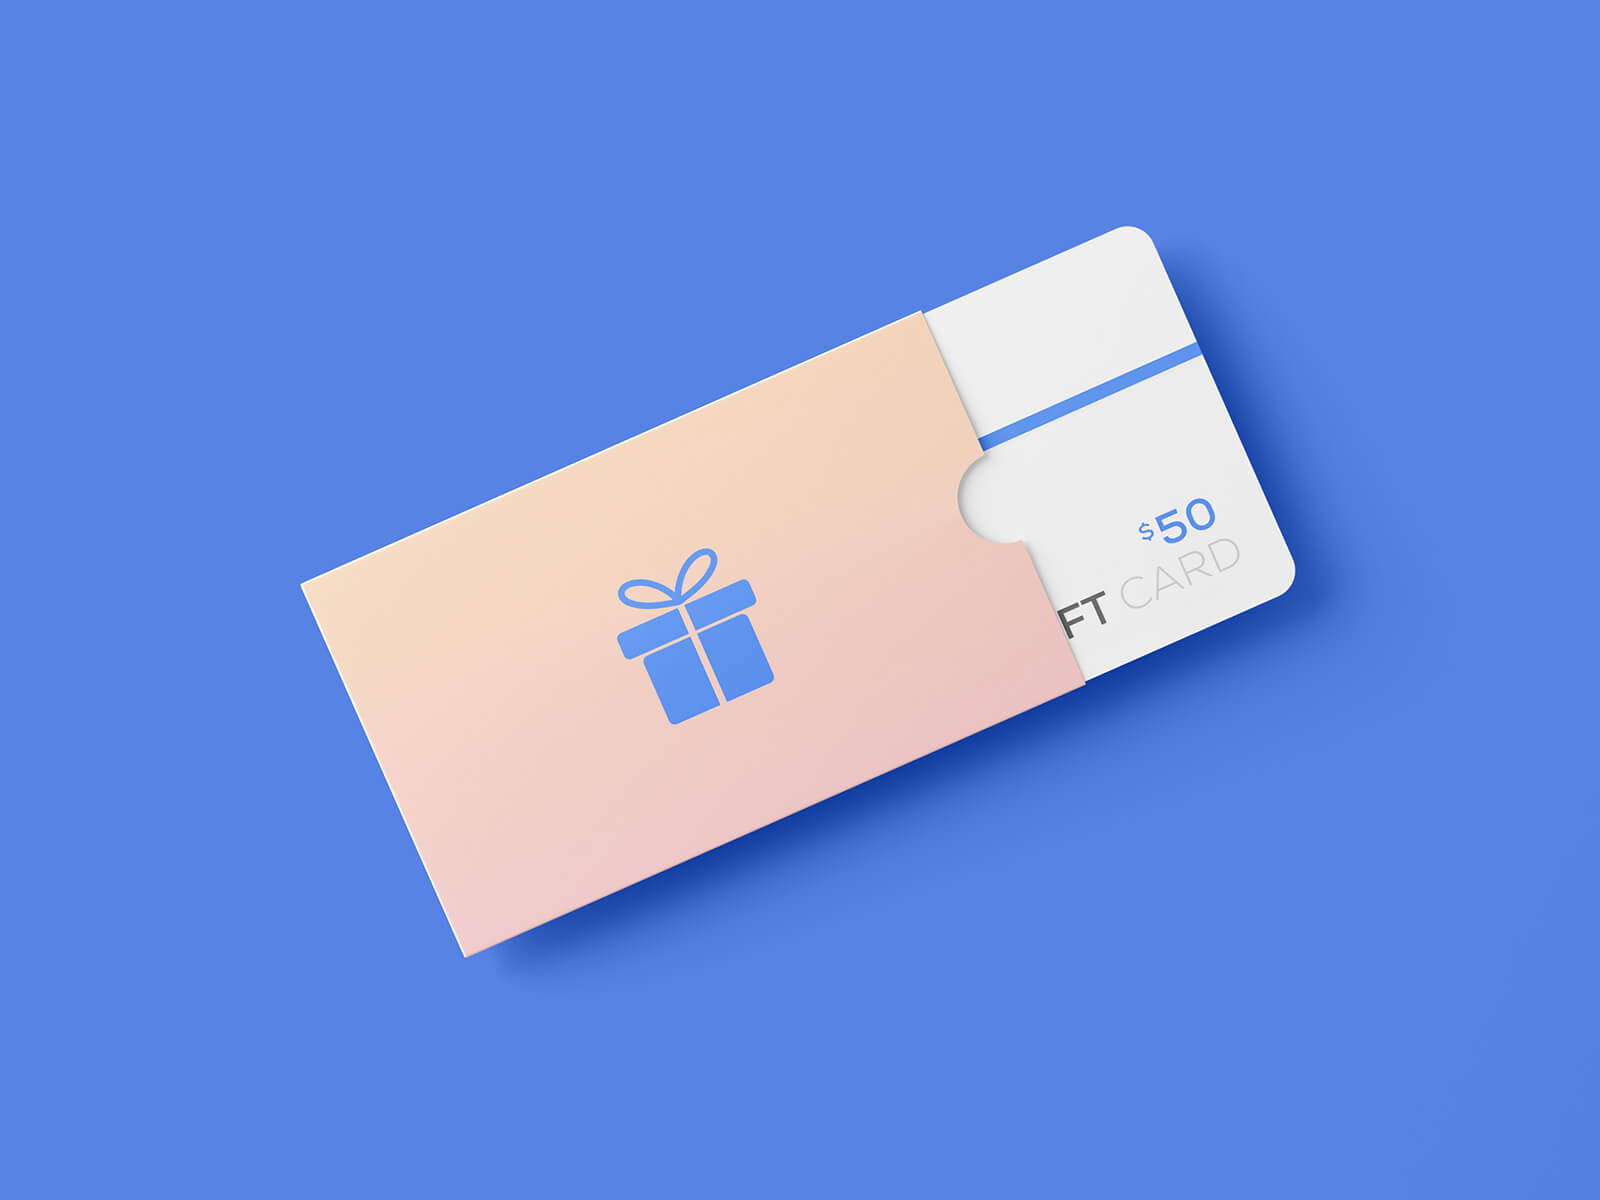 Free Gift Card With Holder Sleeves Mockup PSD